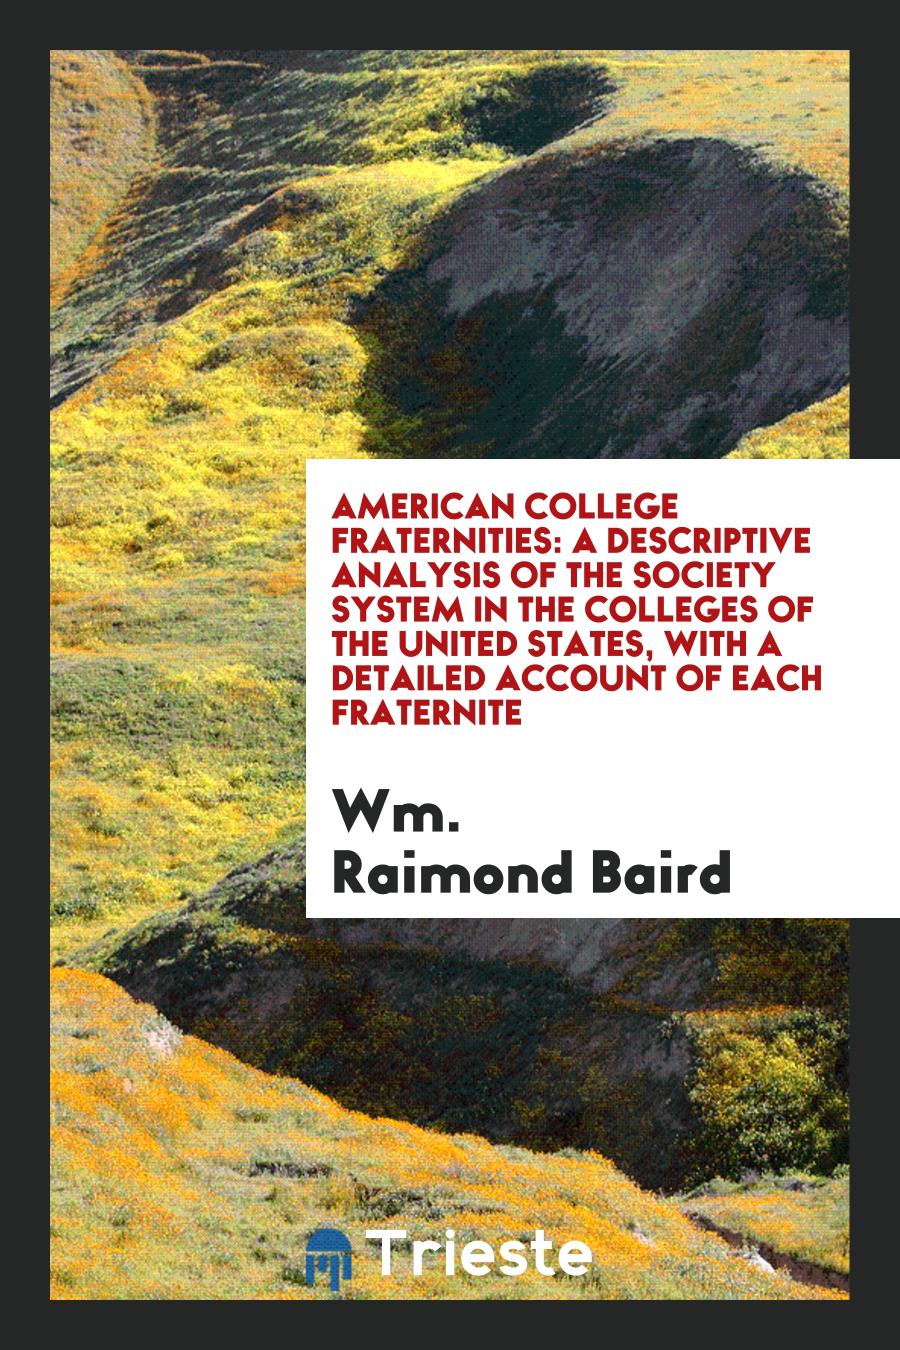 American College Fraternities: A Descriptive Analysis of the Society System in the Colleges of the United States, with a Detailed Account of Each Fraternite